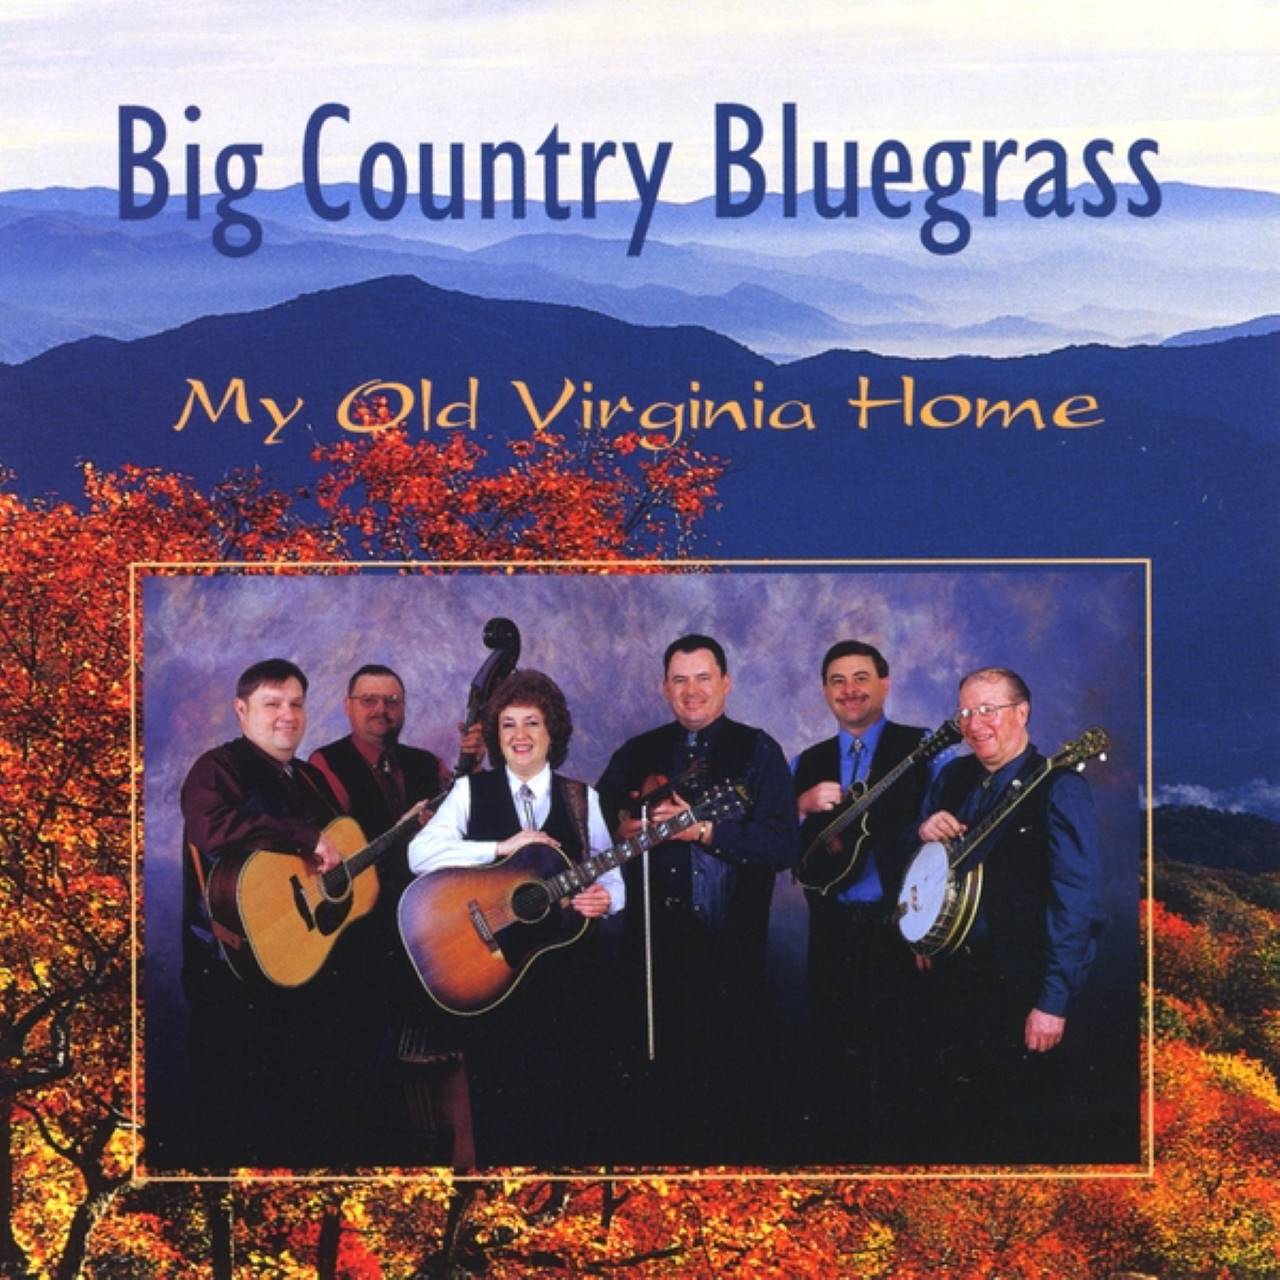 Big Country Bluegrass - My Old Virginia Home cover album